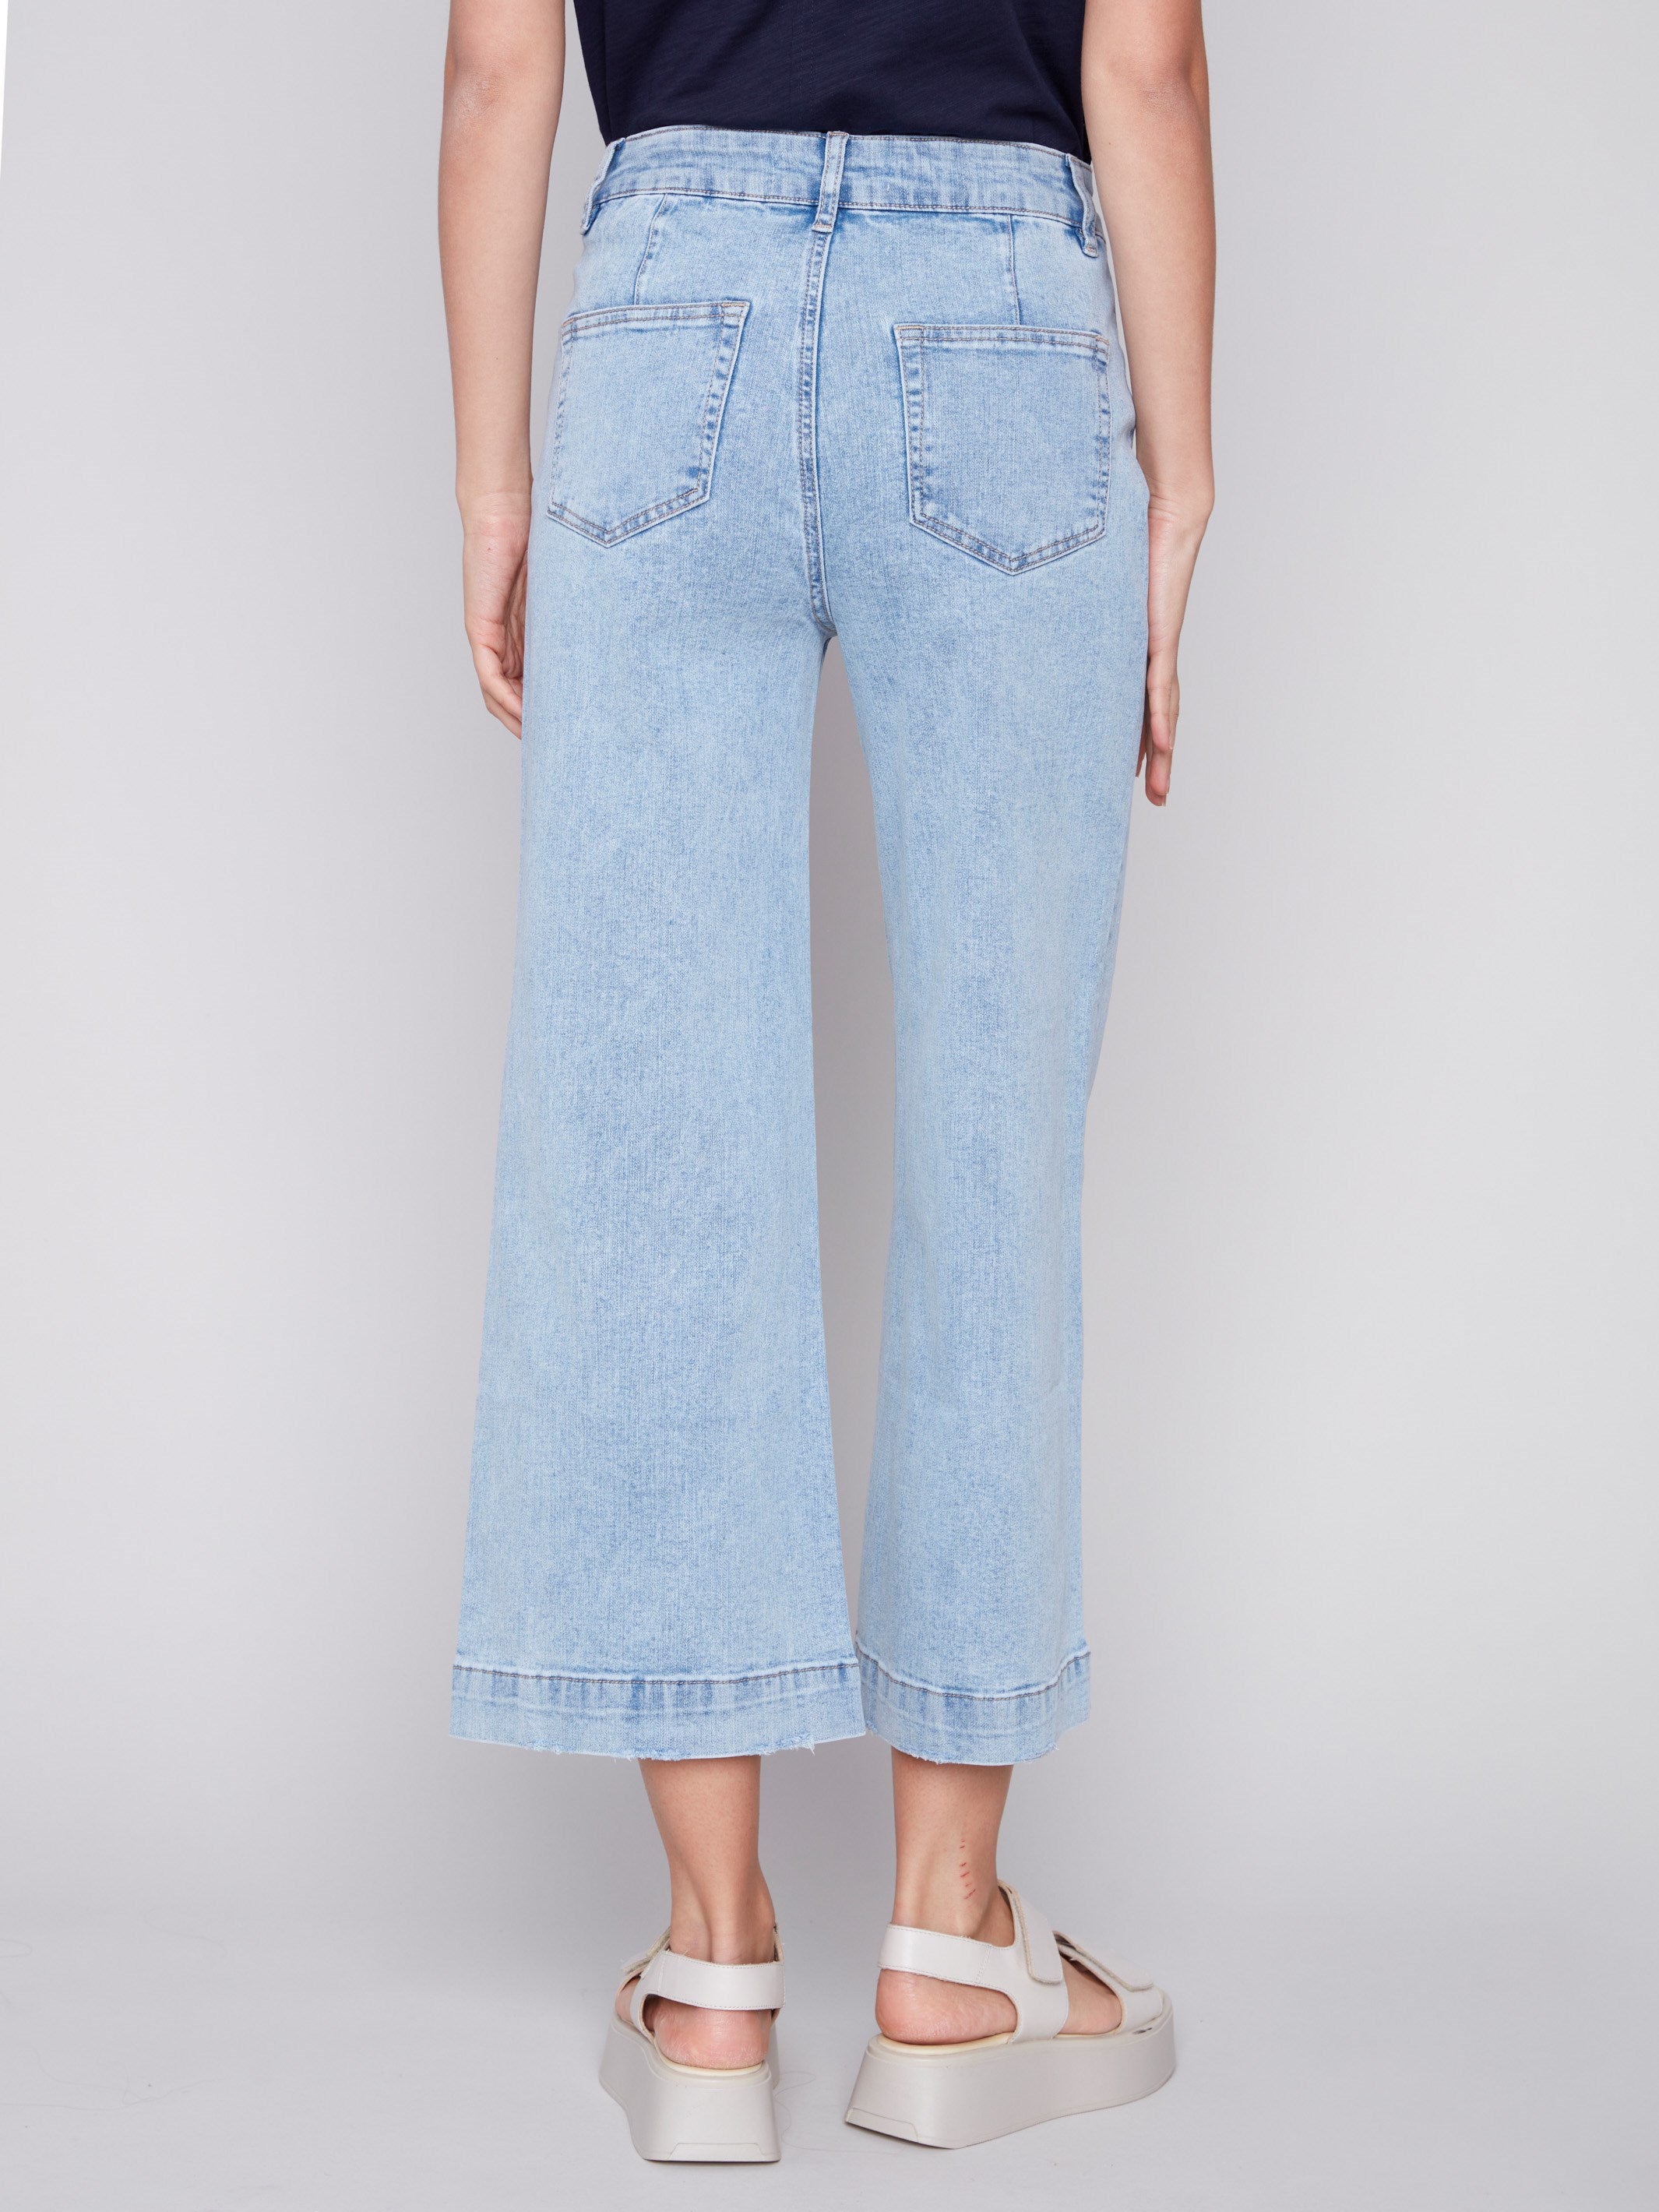 Cropped Wide Leg Jeans - Blue Jean - Charlie B Collection Canada - Image 3